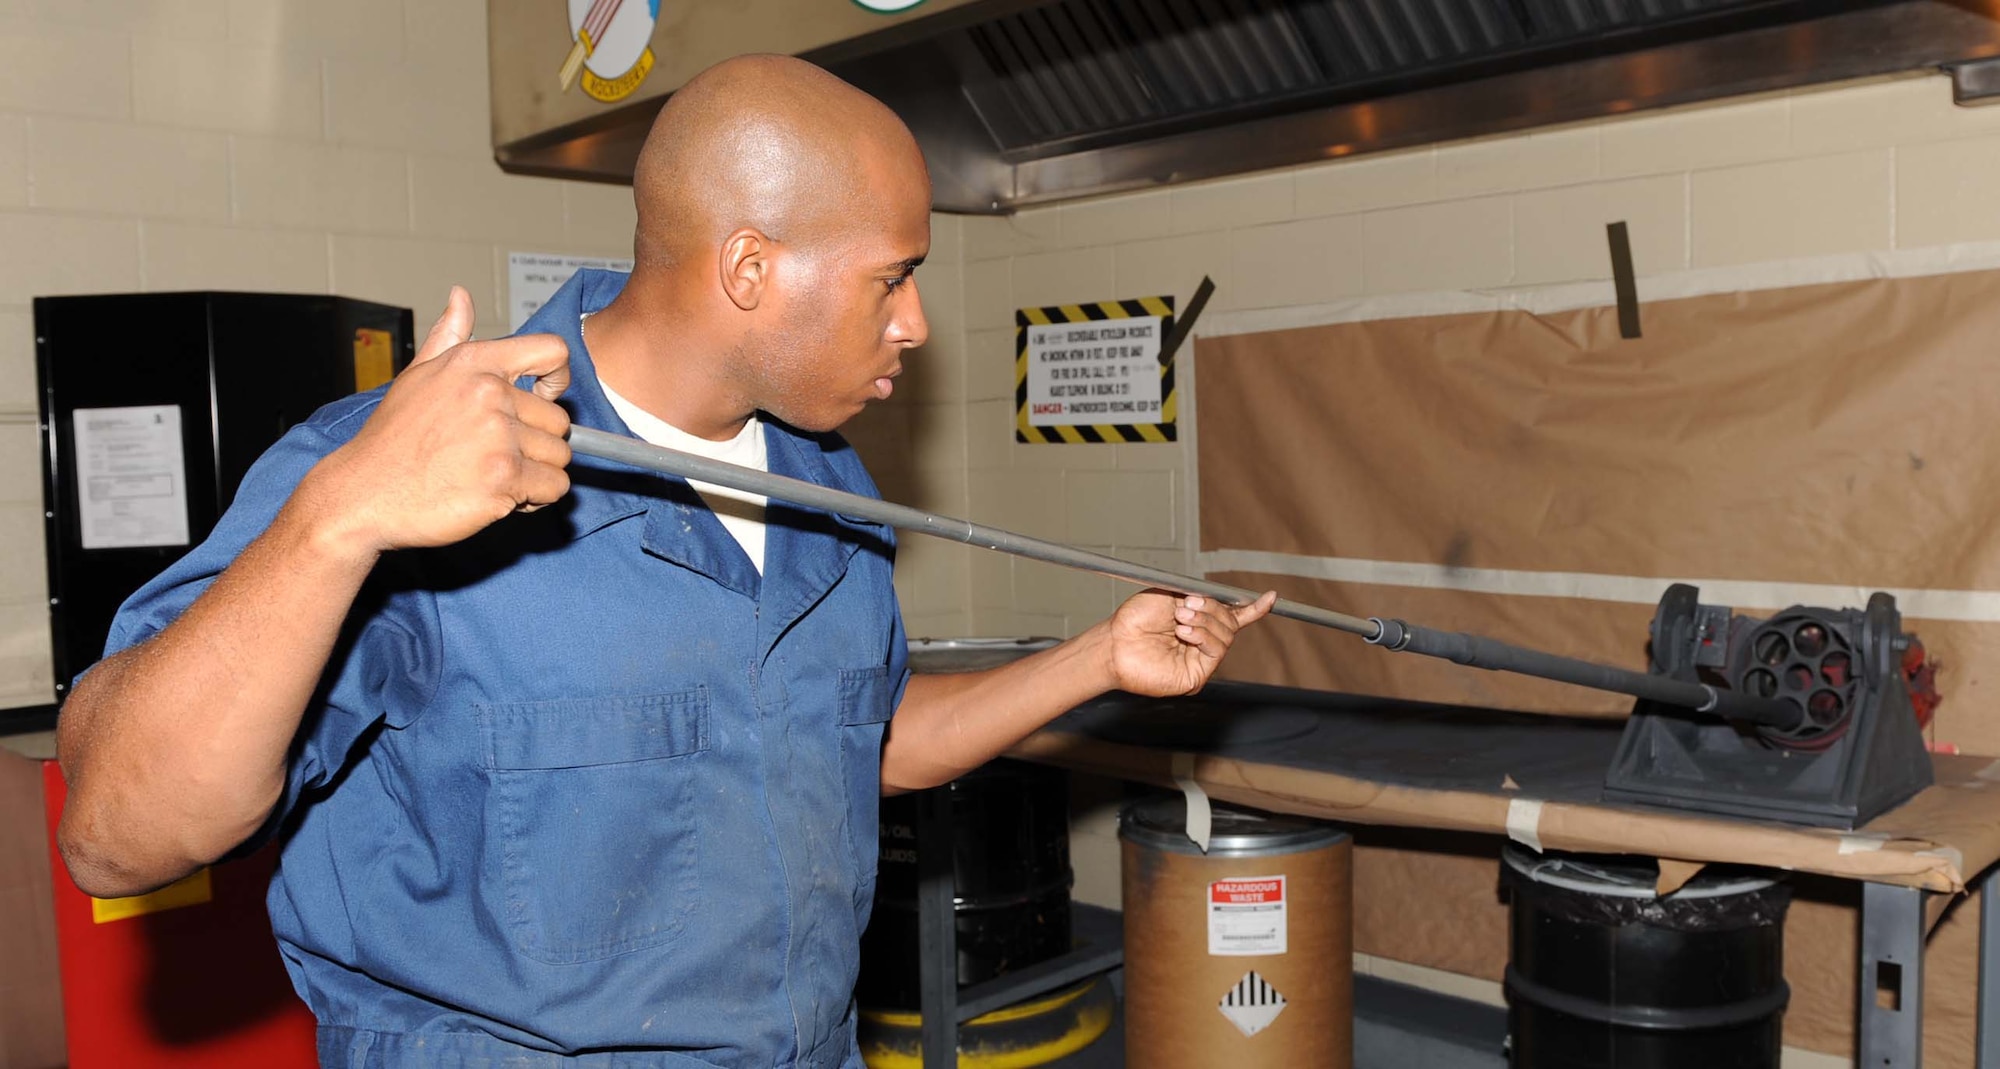 Staff Sgt. Randall Thompson, 4th Equipment Maintenance Squadron armament technician, cleans an F-15E M61A1 20mm Gatling gun barrel at Seymour Johnson Air Force Base, N.C., July 24, 2009. The F-15E can carry 510 rounds for the M61A1, which can be exhausted in five seconds firing 4,000 to 6,000 rounds per minute. (U.S. Air Force photo by Airman 1st Class Gino Reyes)